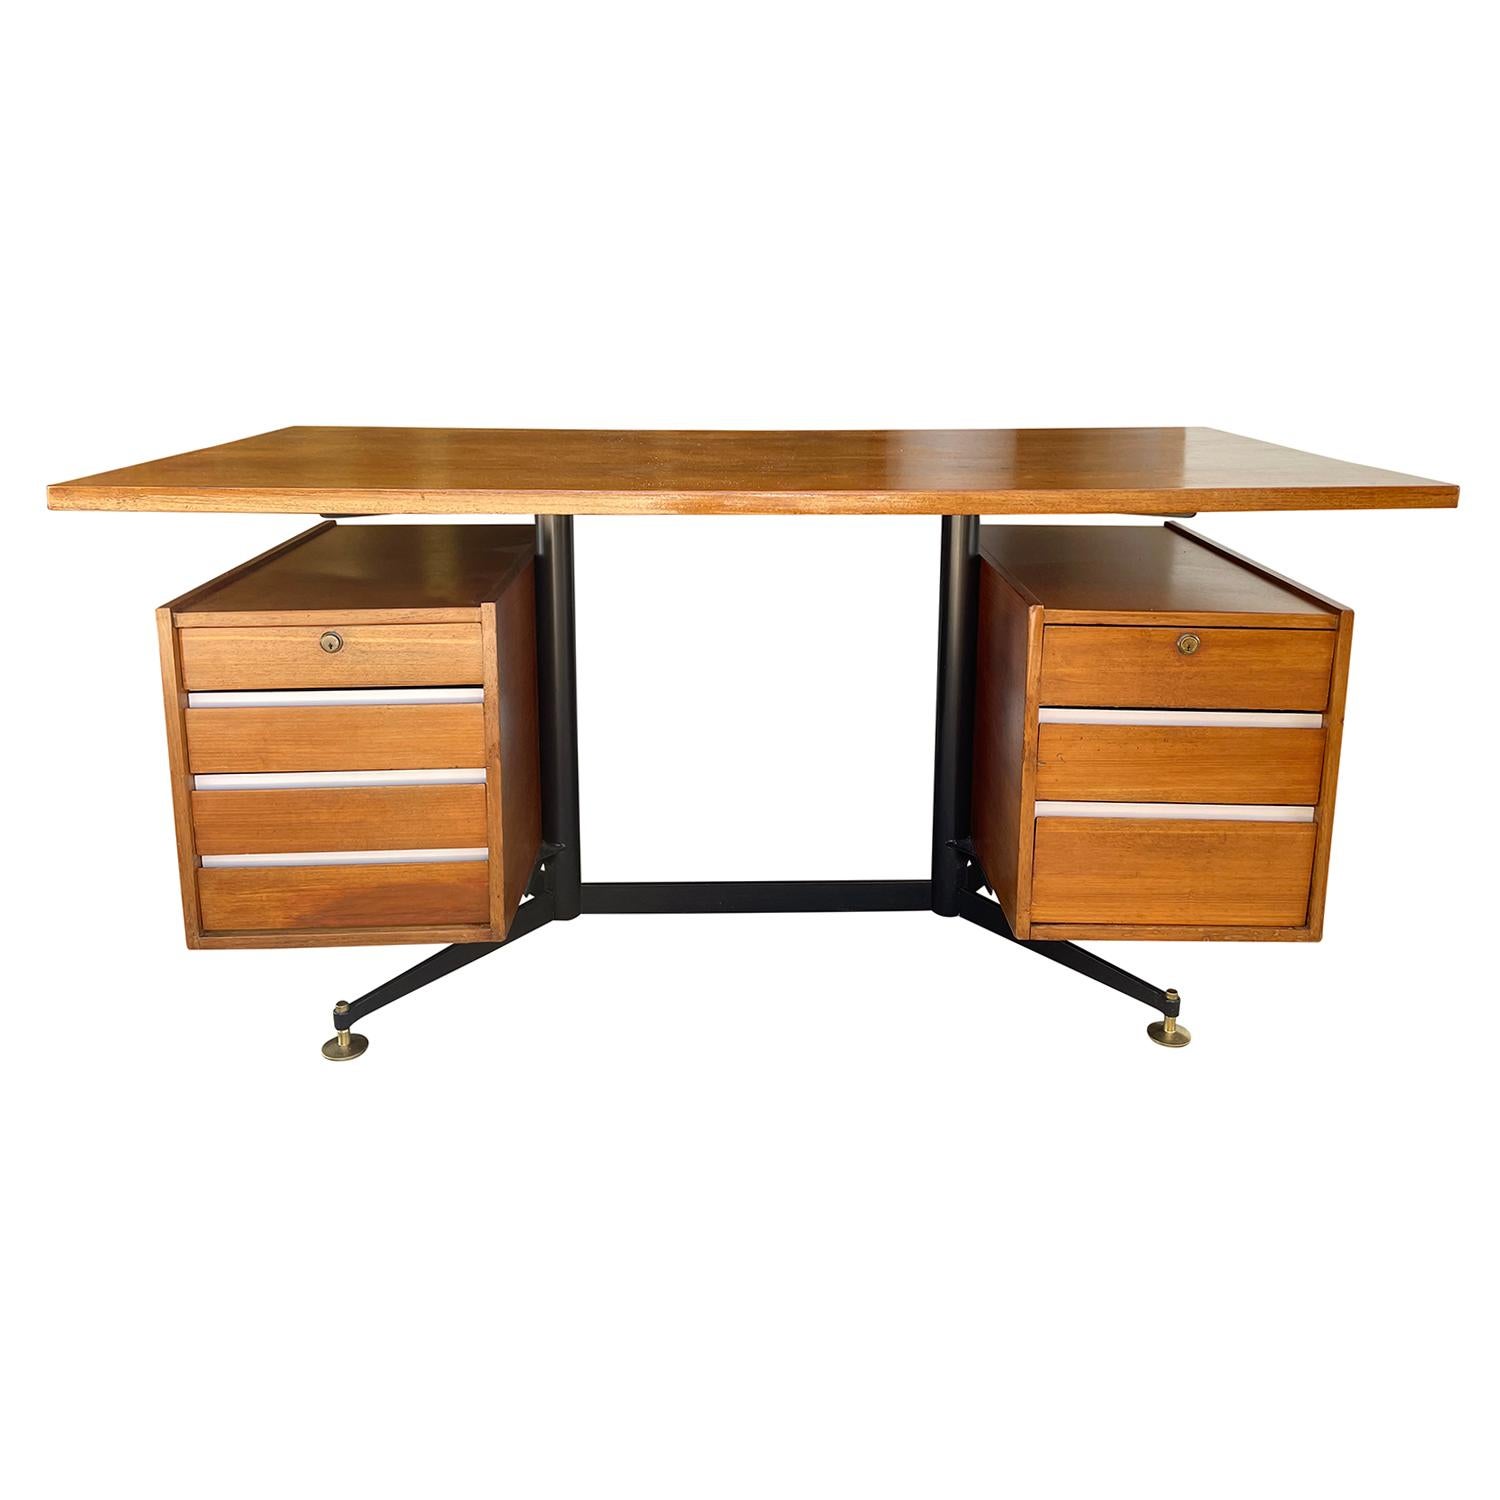 A dark-brown, vintage Mid-Century Modern Italian writing table made of hand carved Teakwood, designed by Gio Ponti, Antonio Fornaroli & Alberto Rosselli and produced by Studio PFR in good condition. The freestanding desk has a floating wooden top,